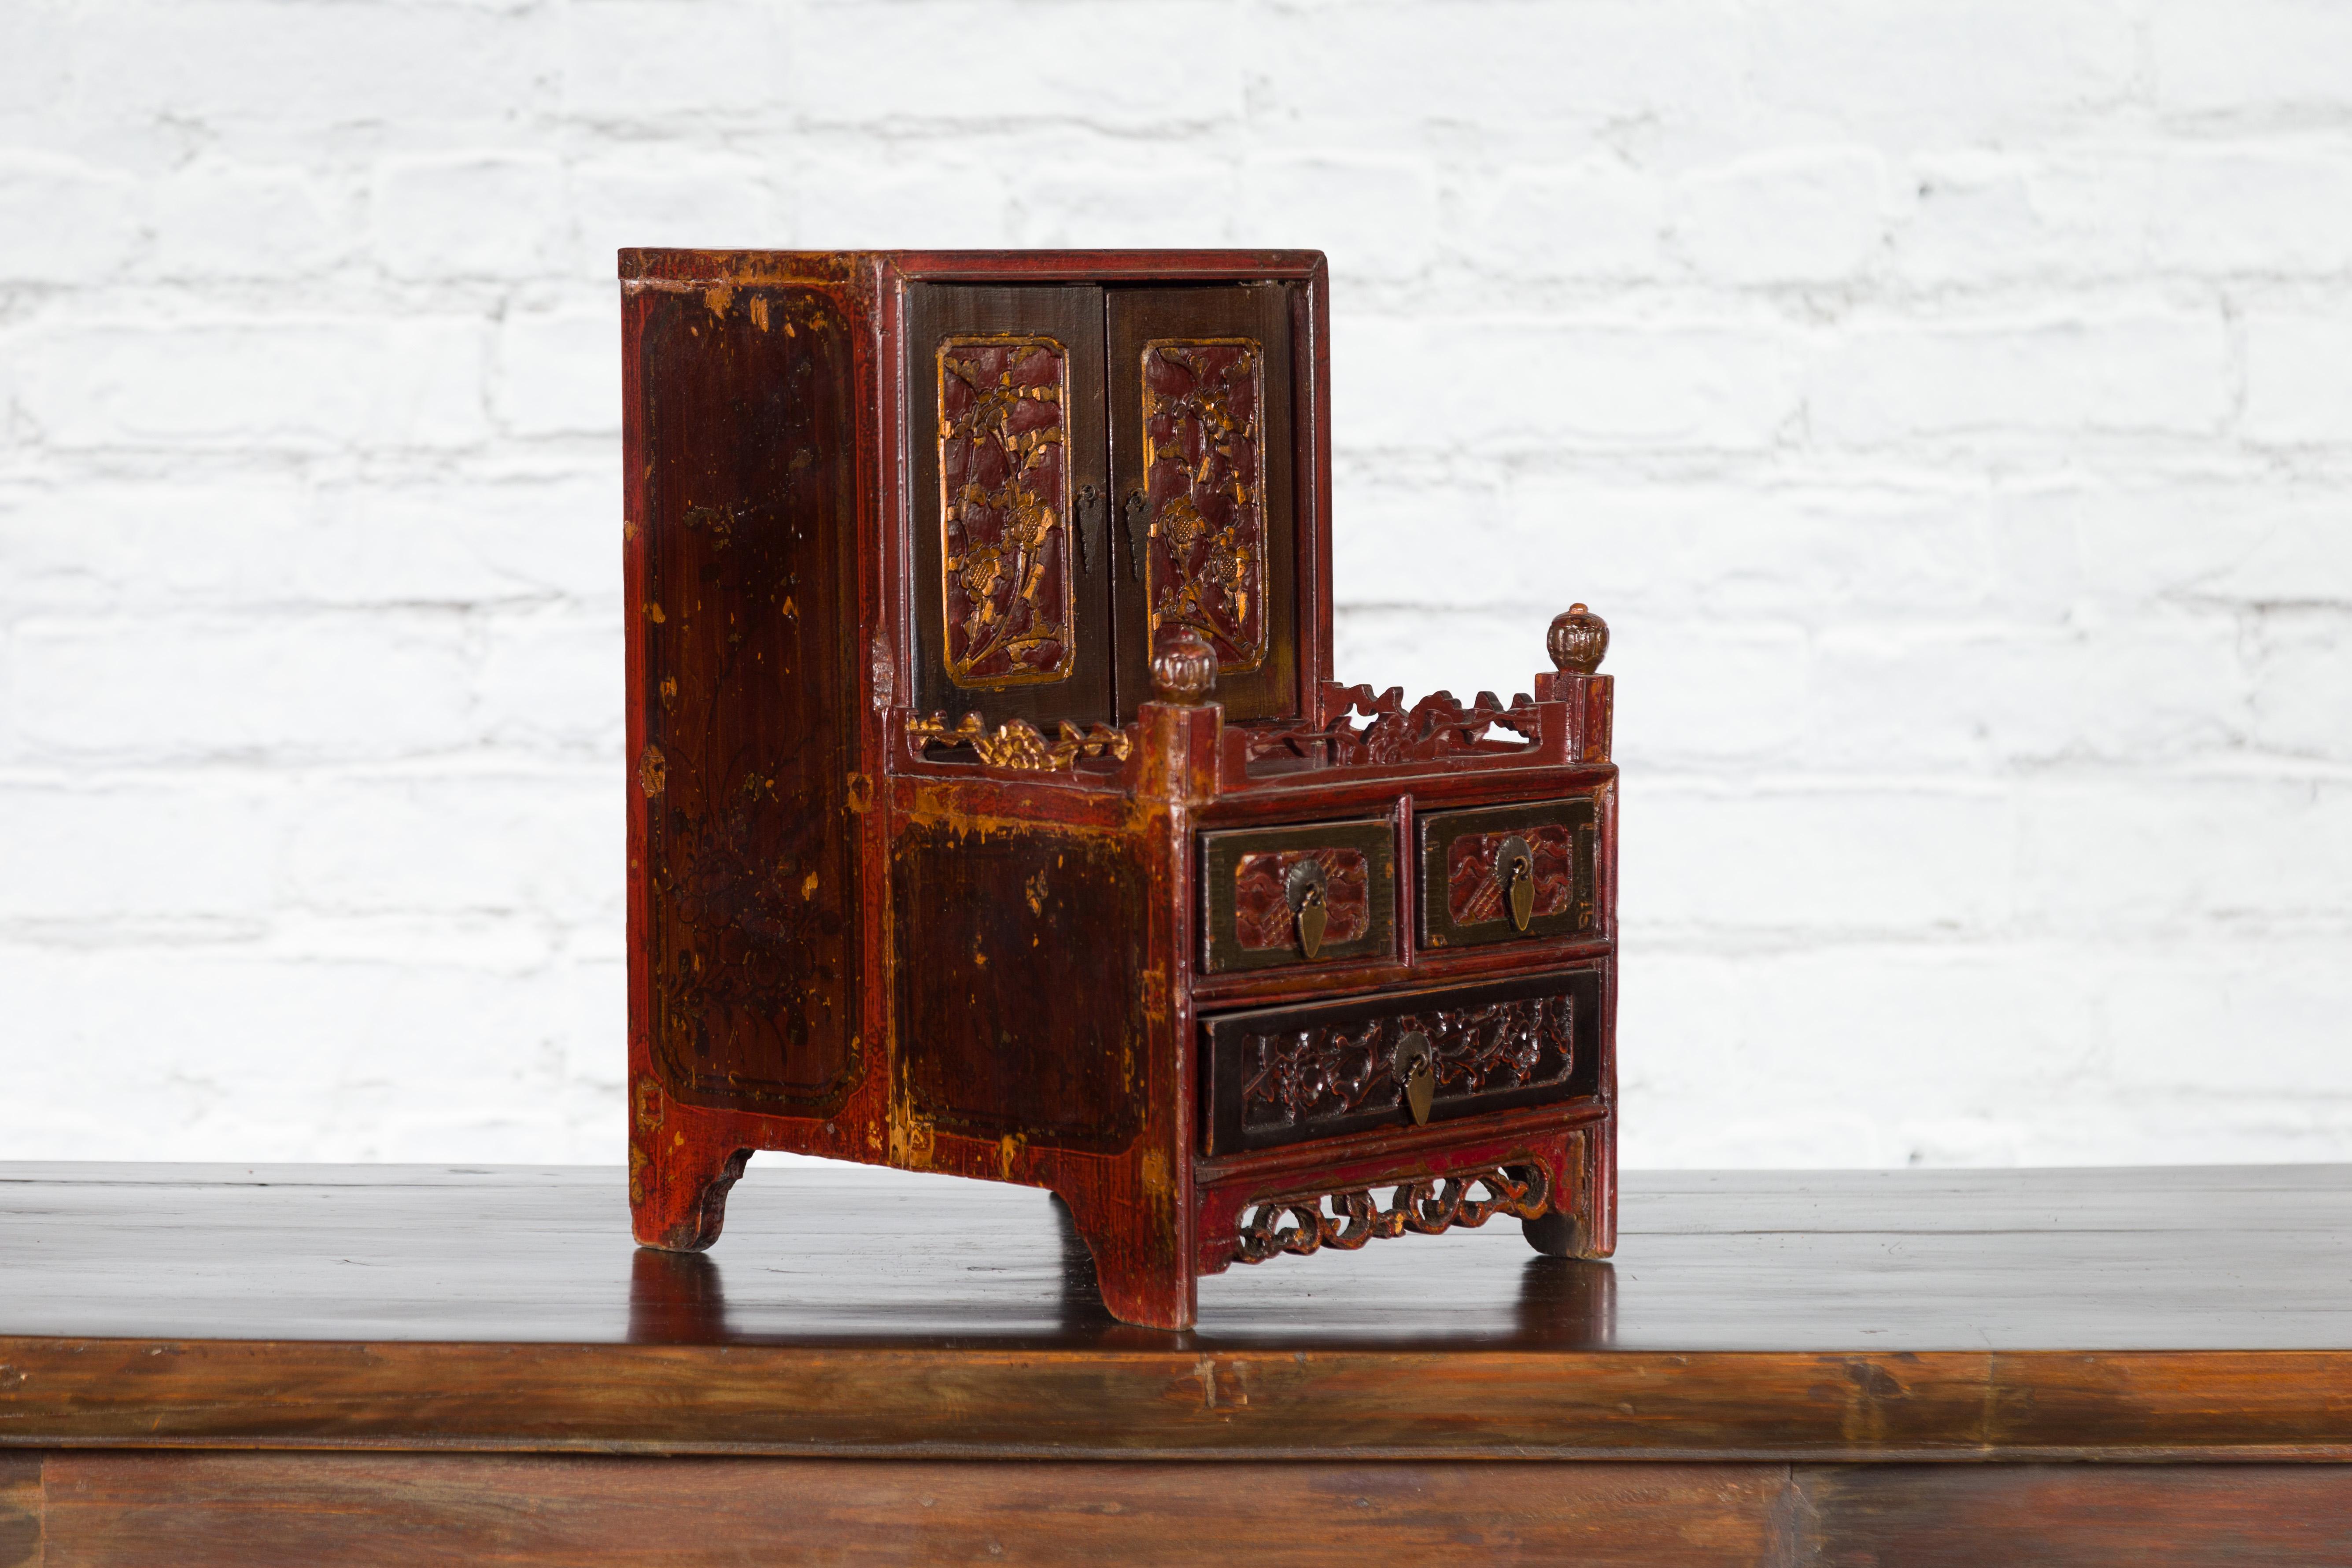 Qing Dynasty 19th Century Red and Brown Lacquer Jewelry Box with Carved Foliage In Good Condition For Sale In Yonkers, NY